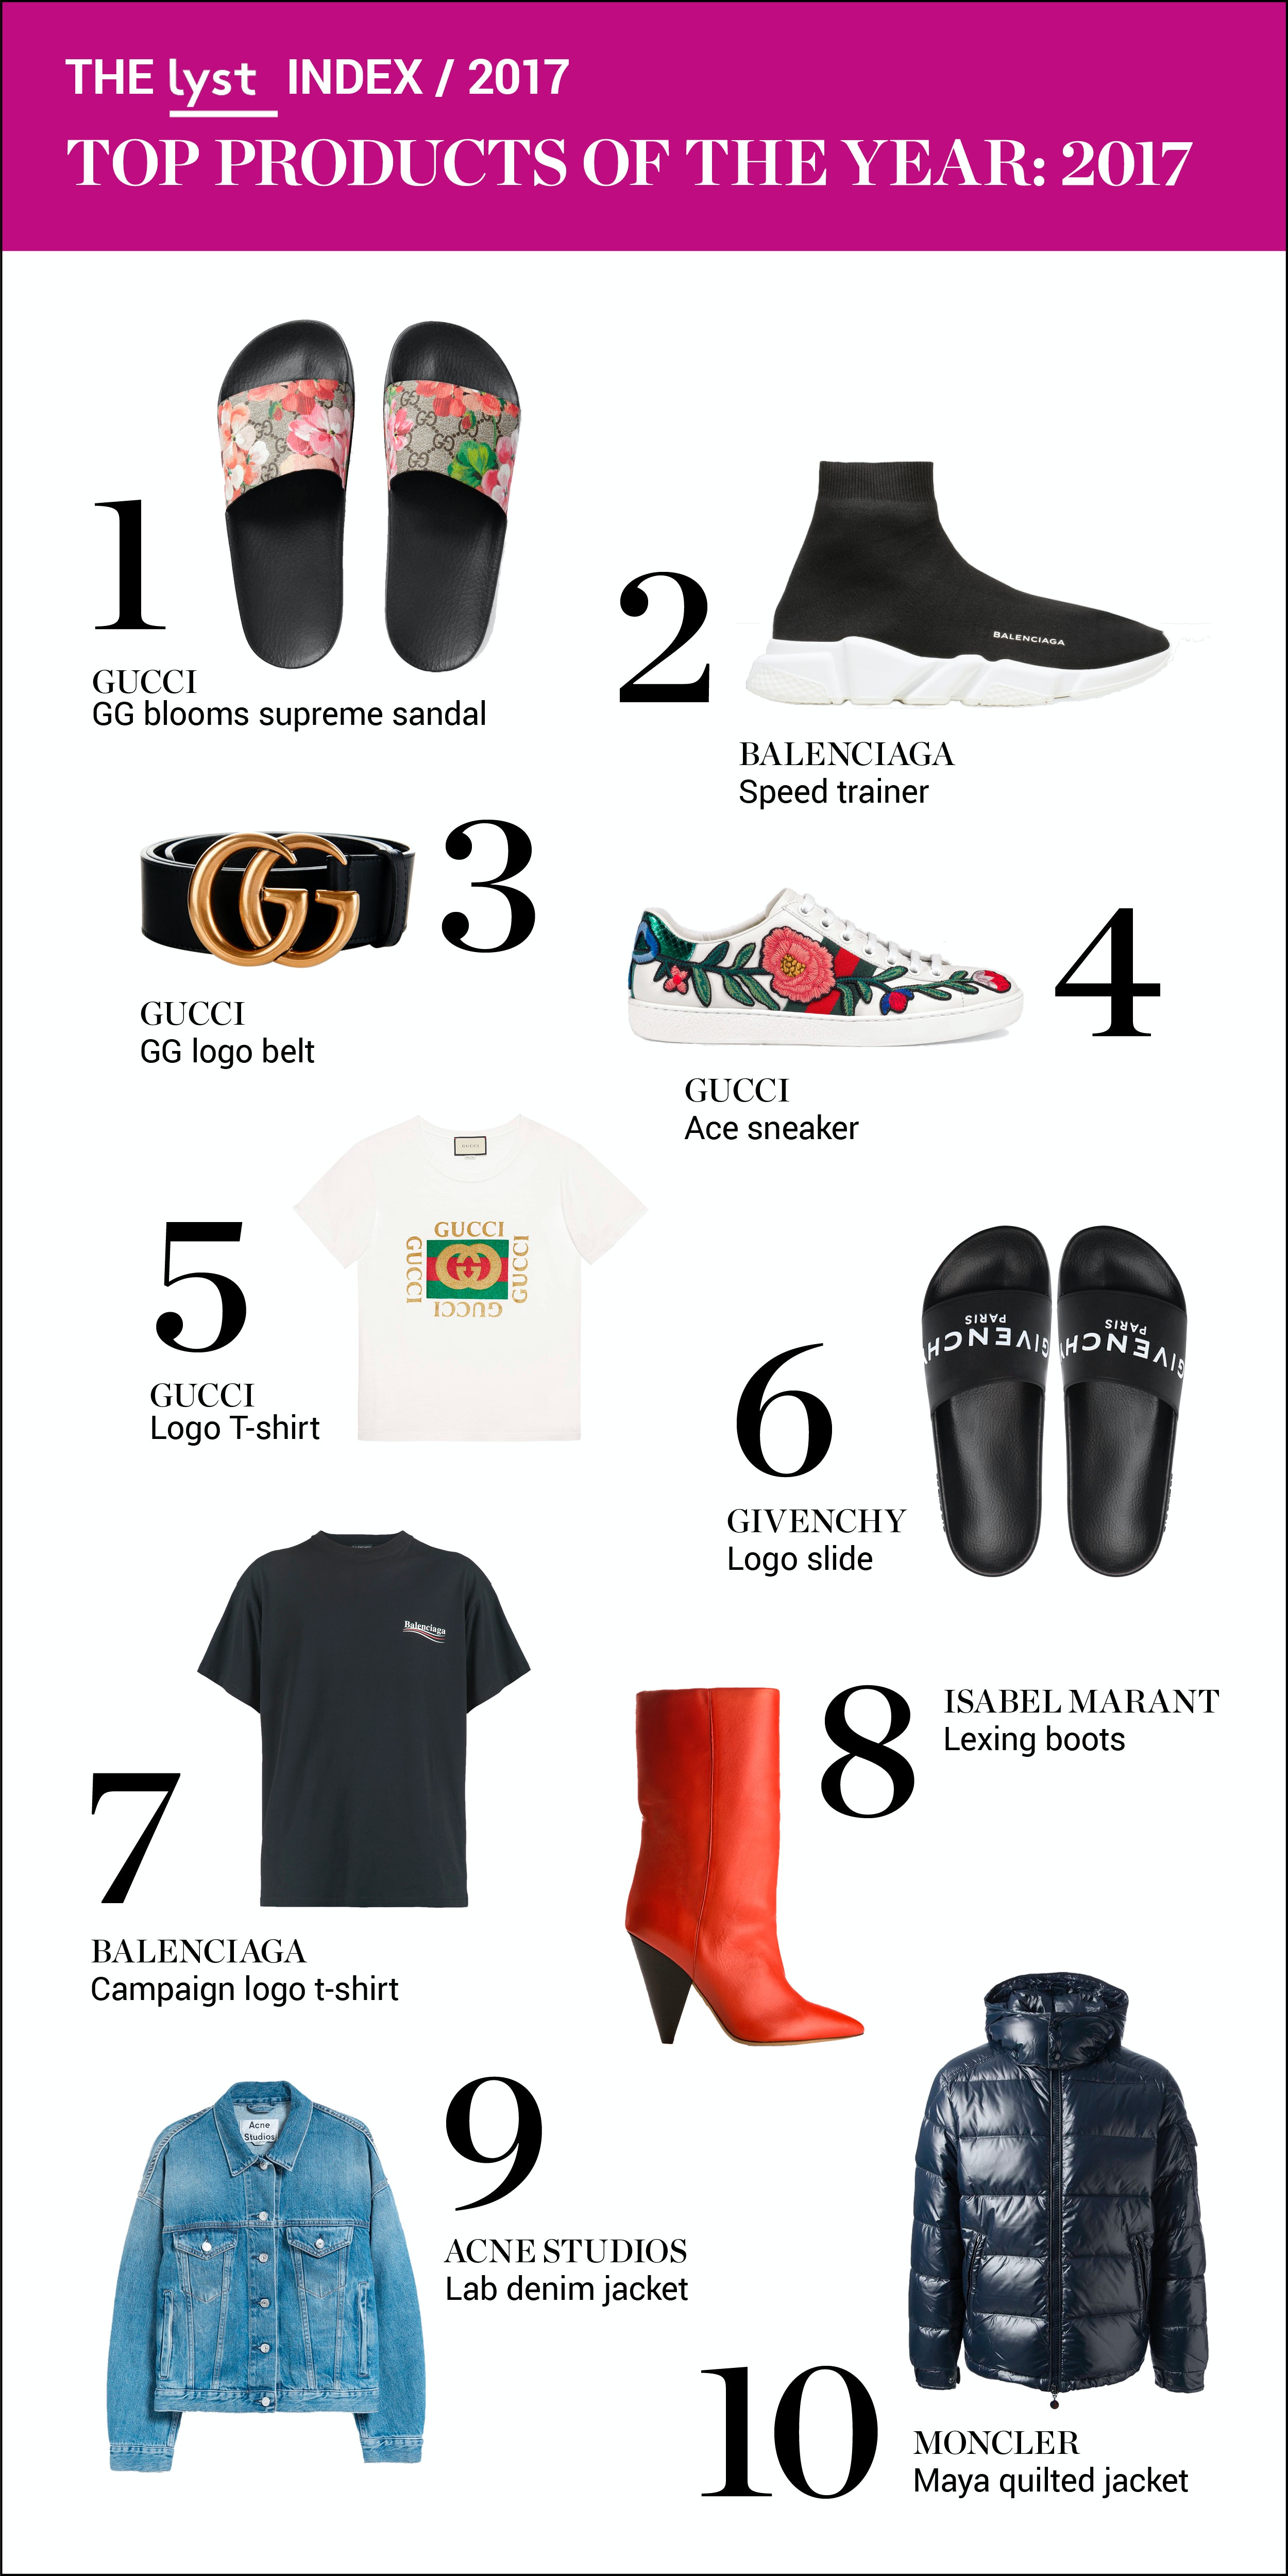 gucci competitor analysis